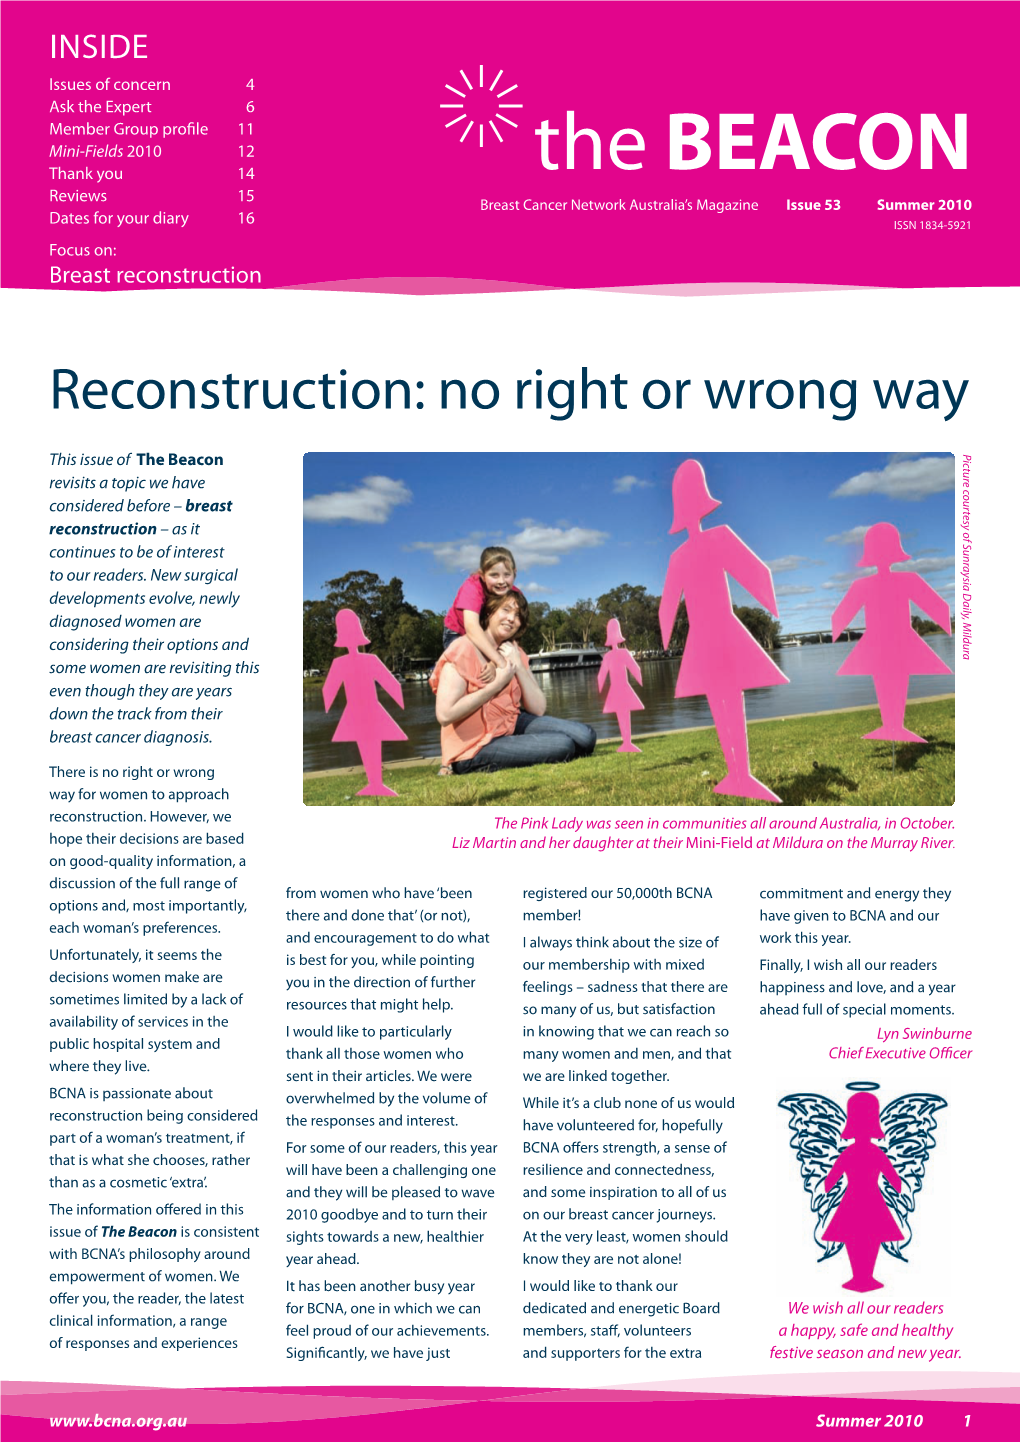 The BEACON Reviews 15 Breast Cancer Network Australia’S Magazine Issue 53 Summer 2010 Dates for Your Diary 16 ISSN 1834-5921 Focus On: Breast Reconstruction